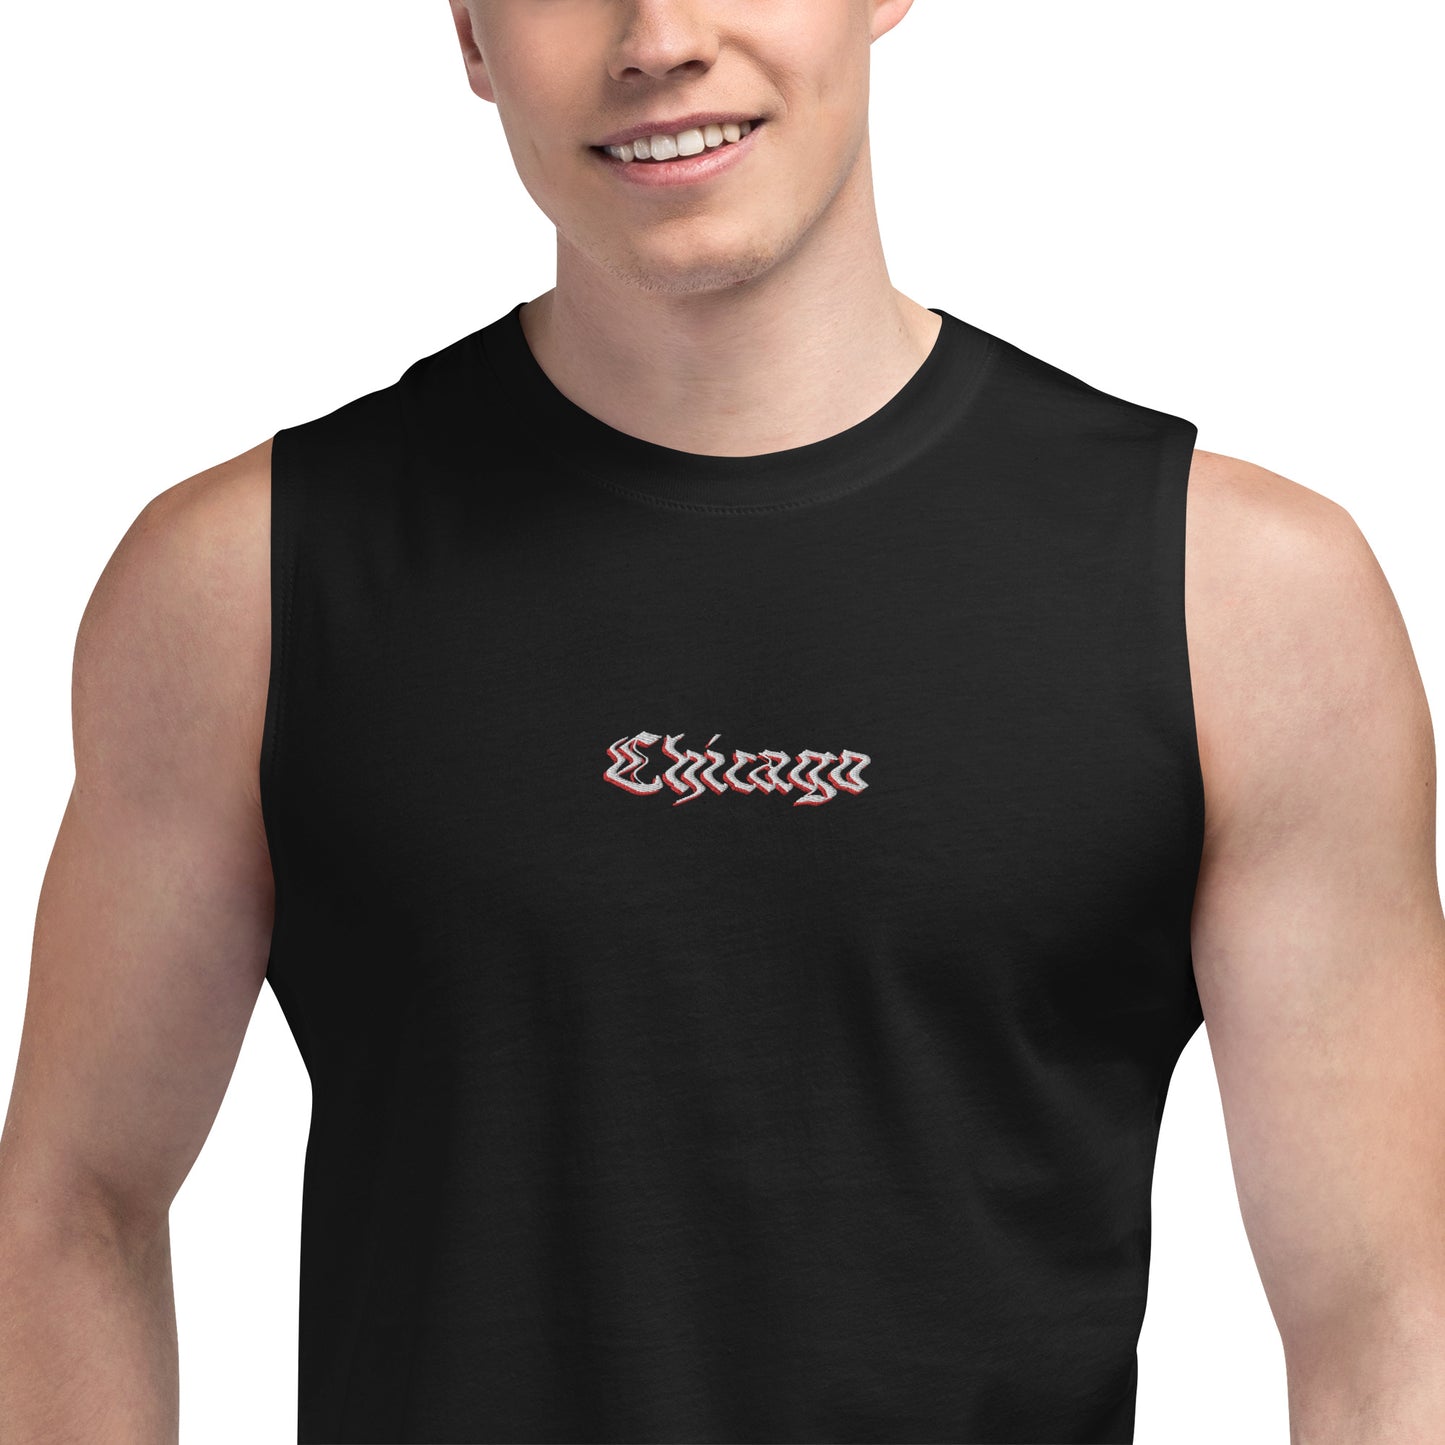 CHI-CTY - Chicago Legacy | Tank Top